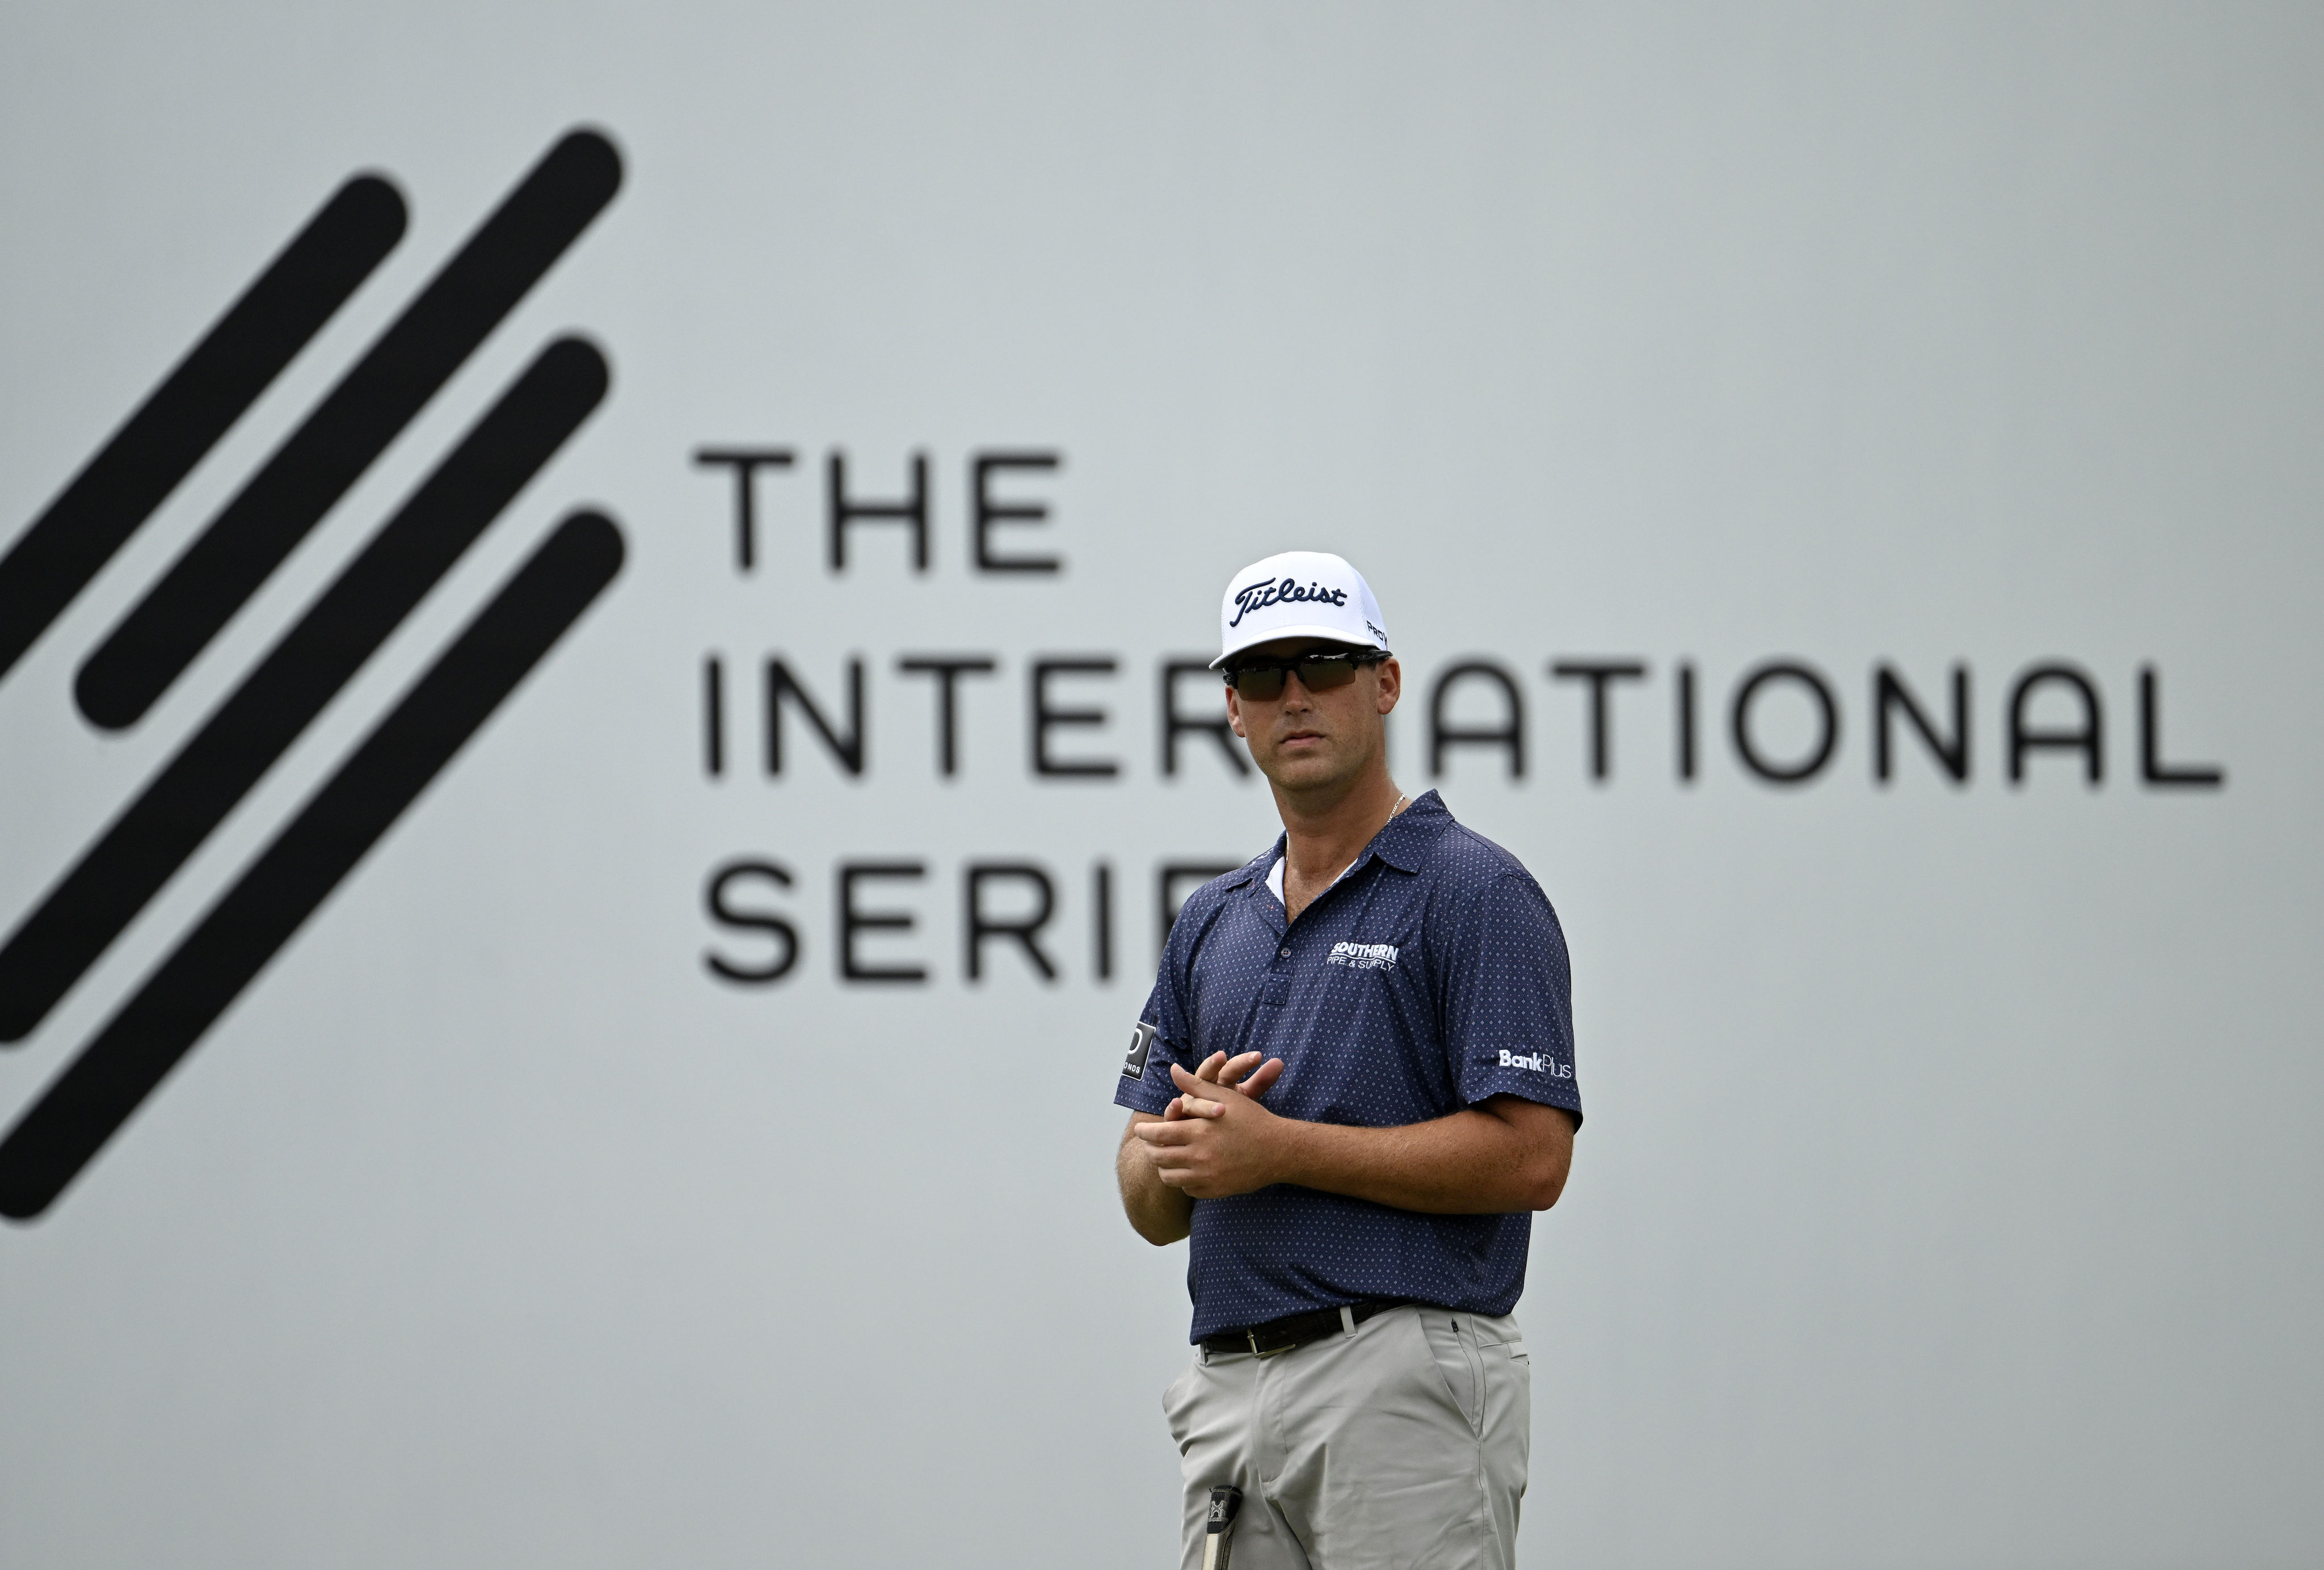 Andy Ogletree has all but won the International Series order of merit. Photo: Asian Tour